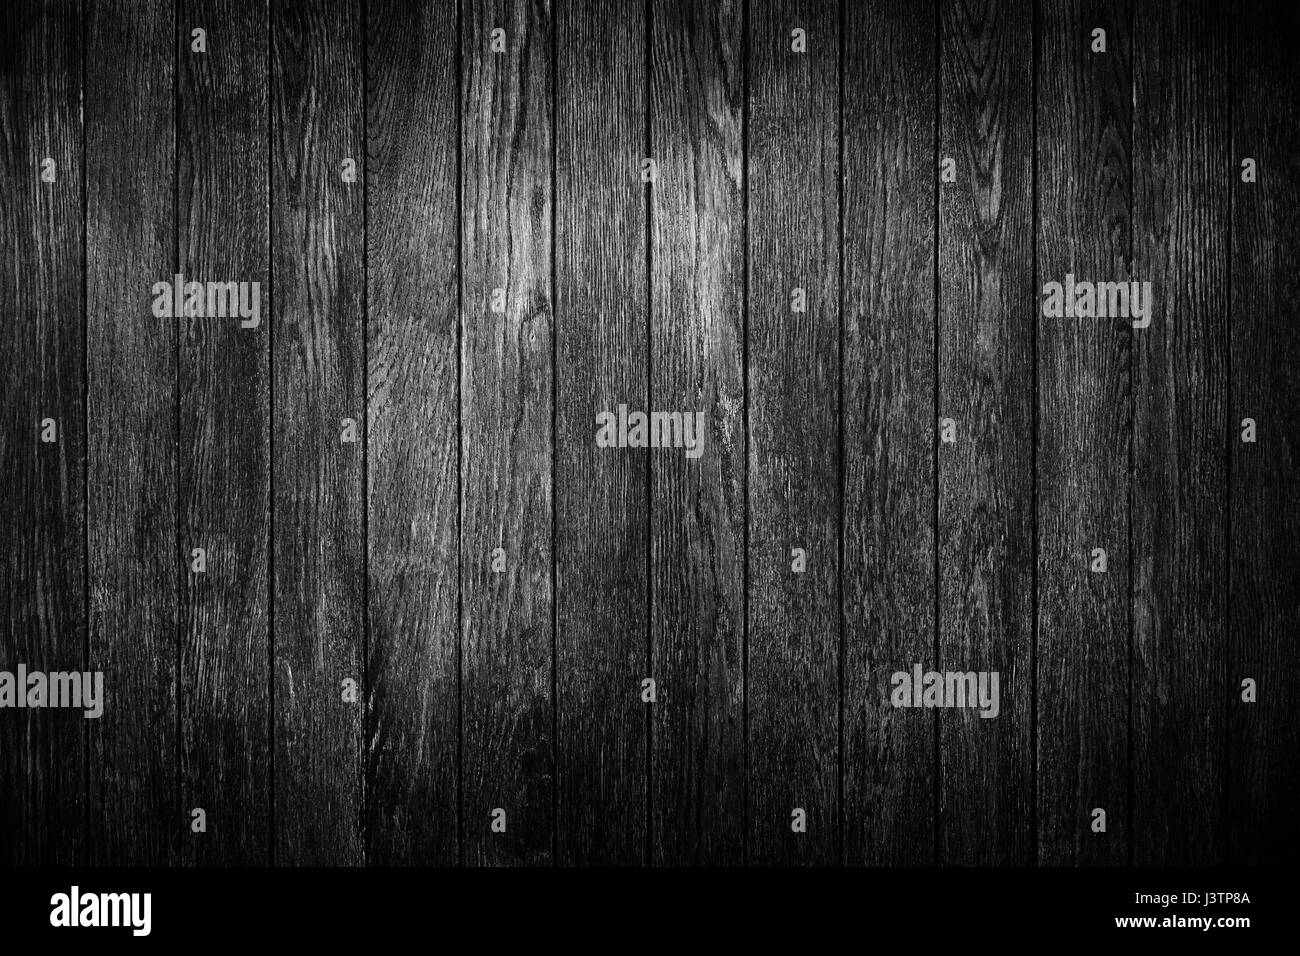 Wood background, detail of a textured, wood decoration Stock Photo